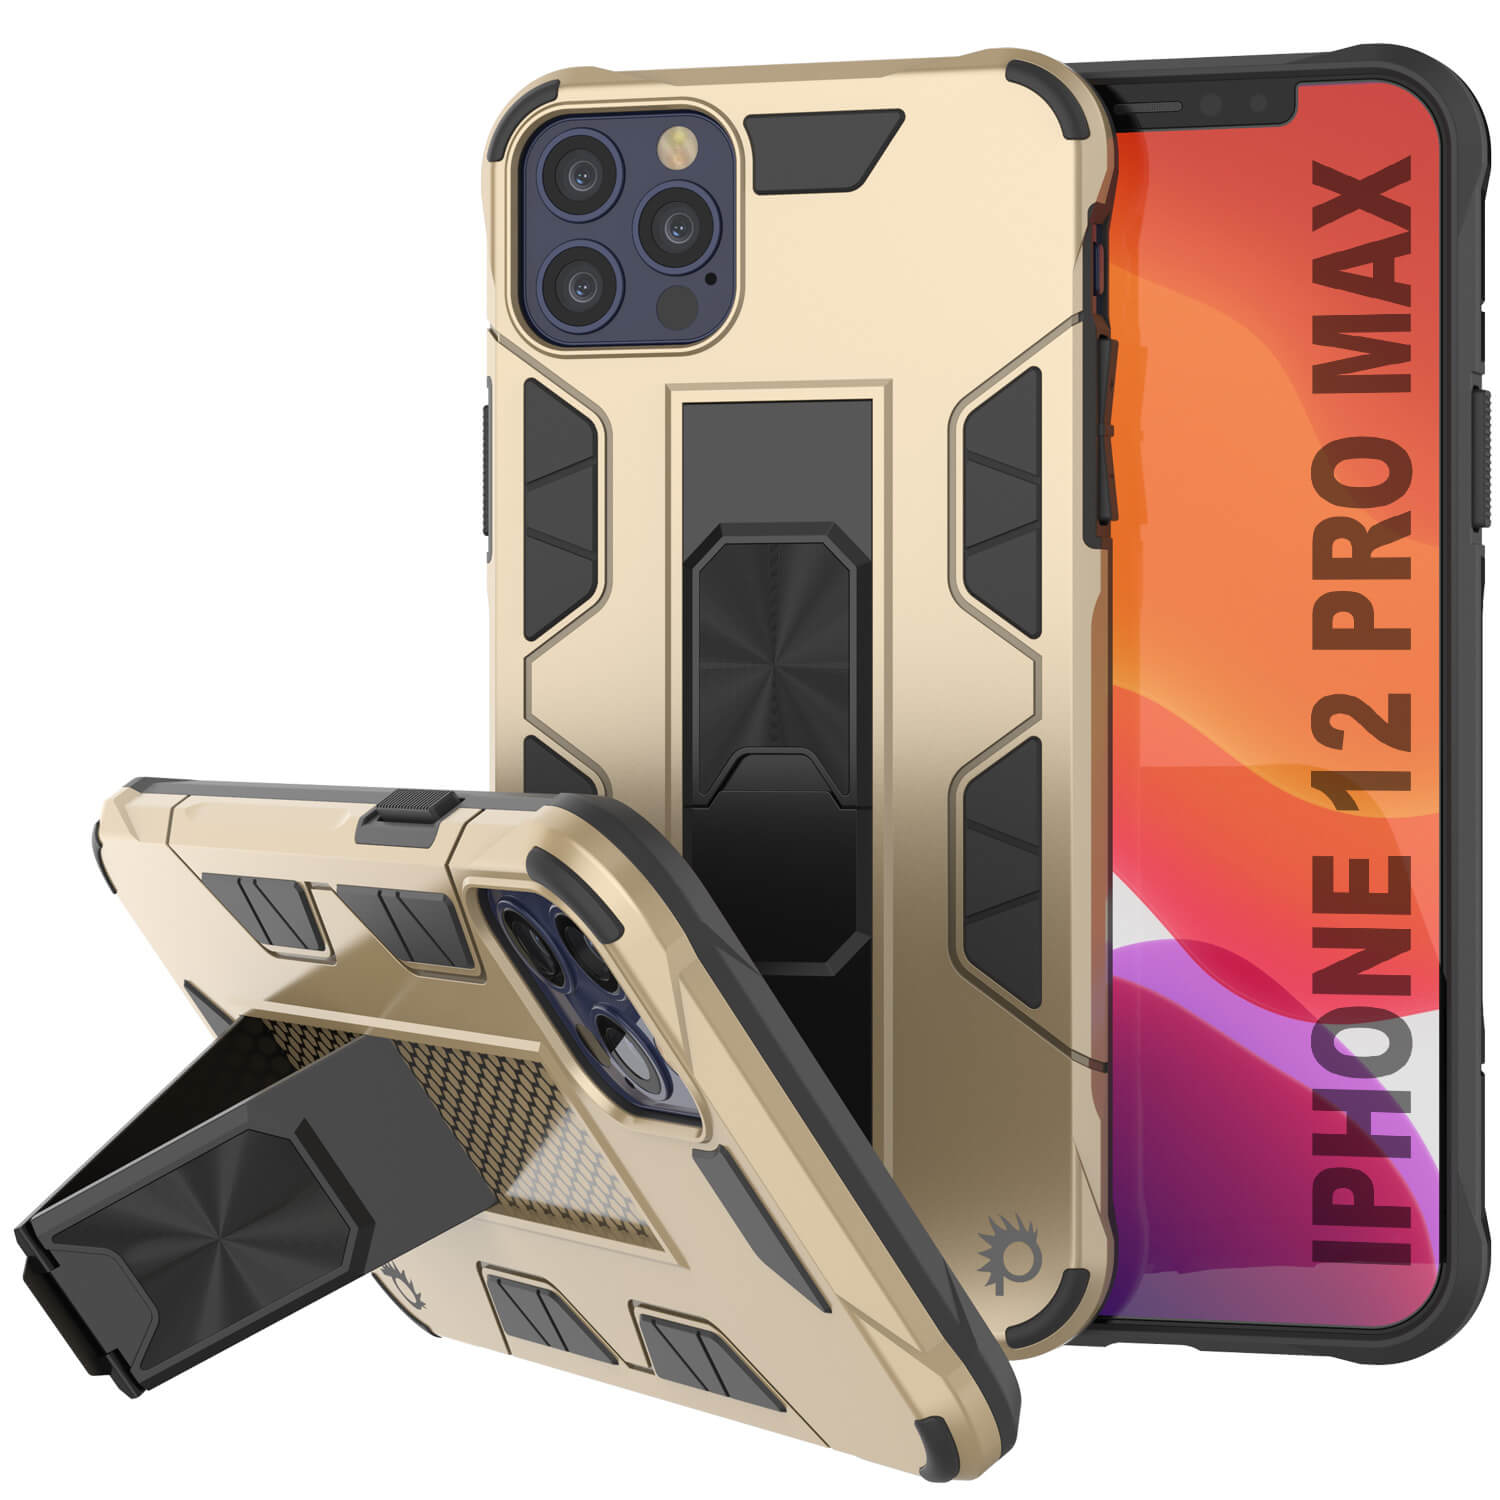 Punkcase Iphone 12 Pro Max Military Case With Kickstand